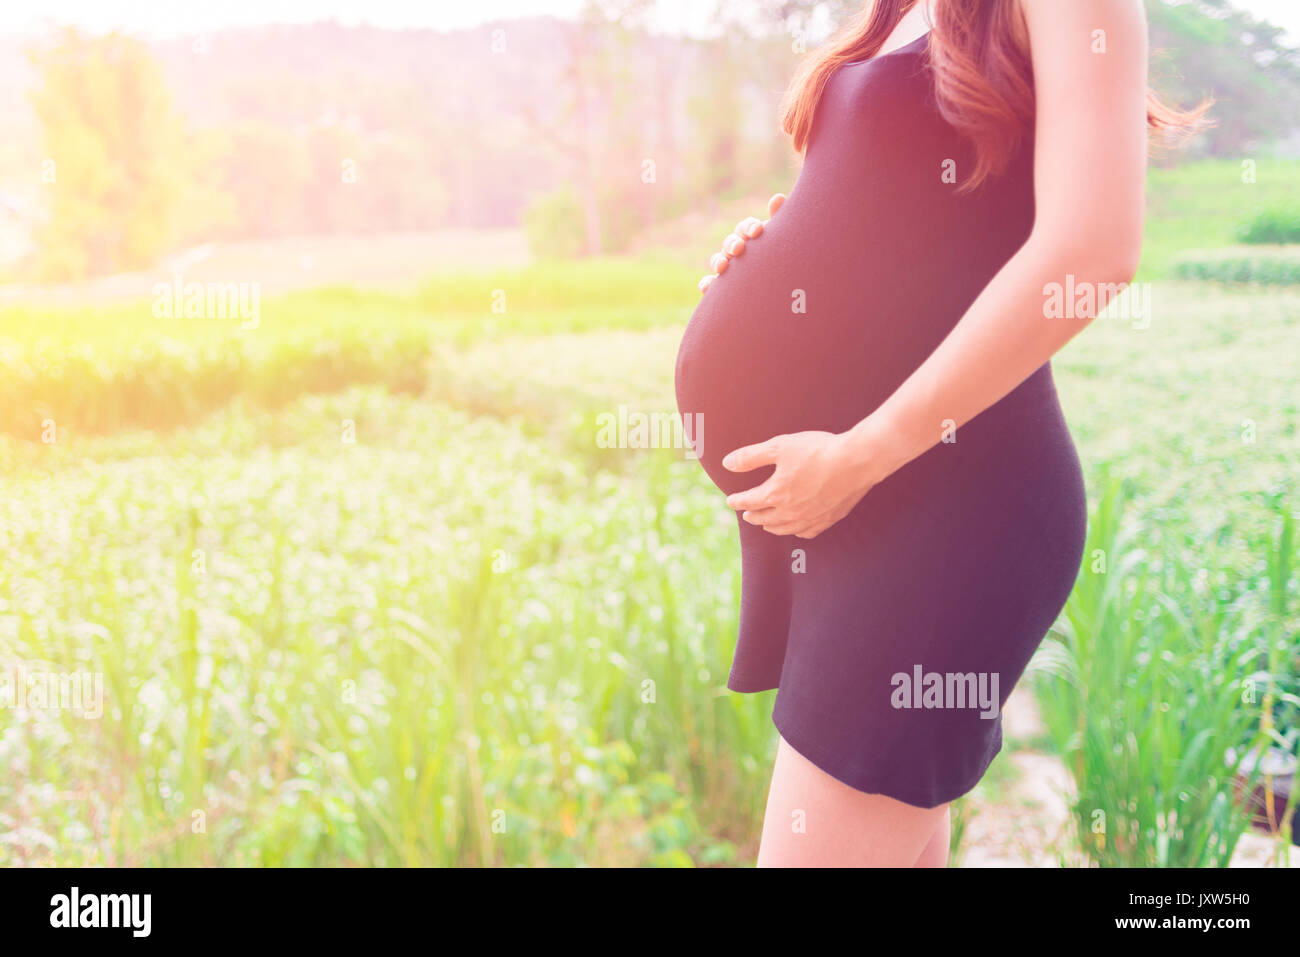 a pregnant woman travel in farm, Show Belly, baby coming soon on the world Stock Photo